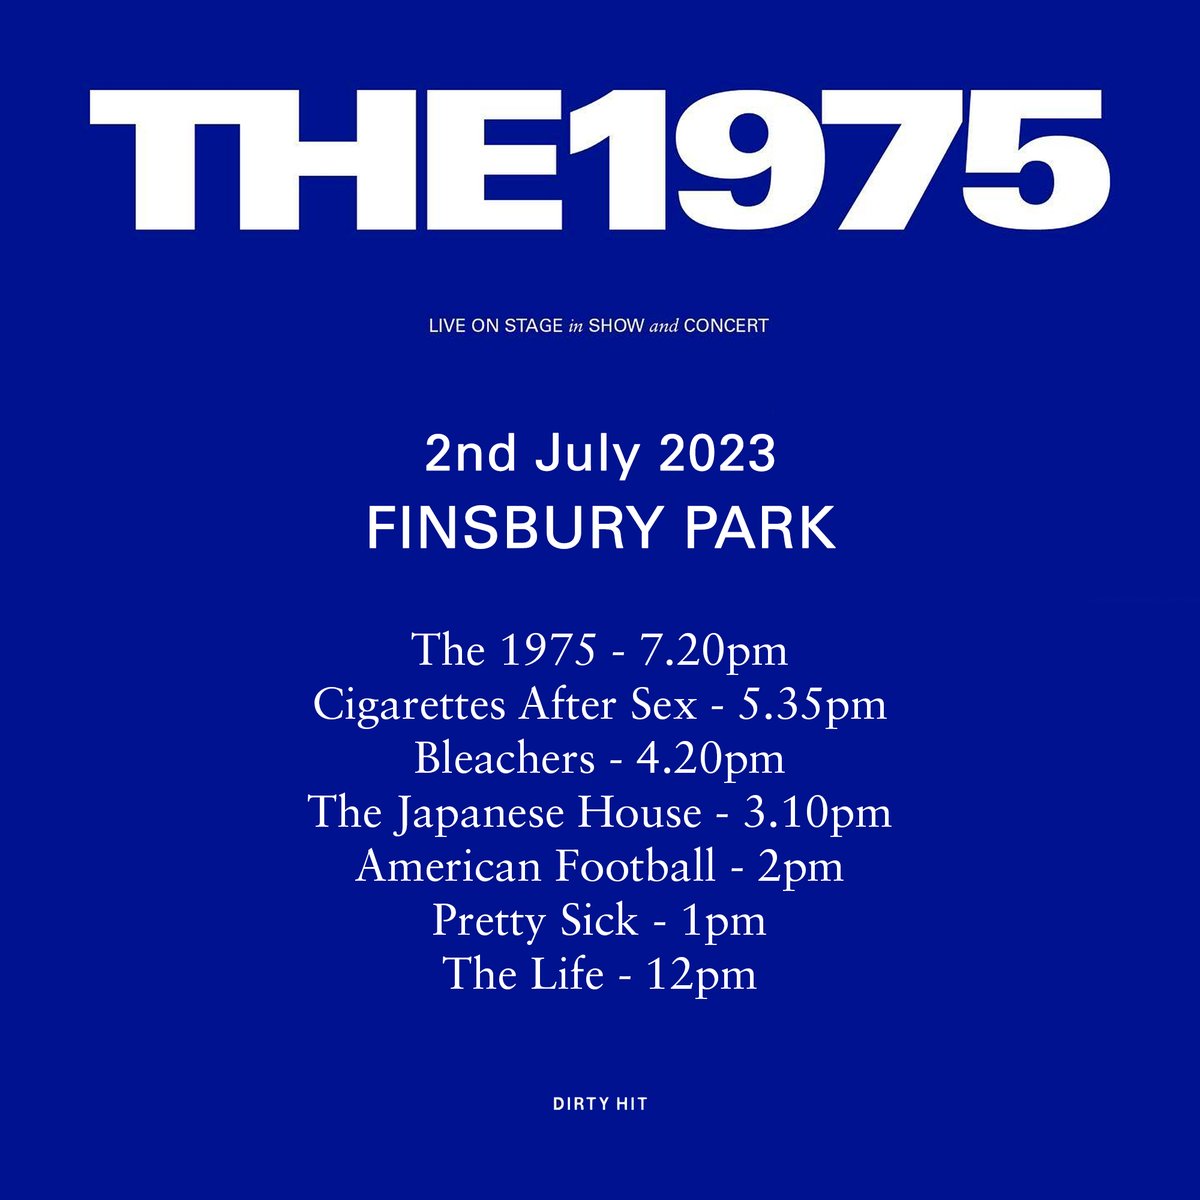 The 1975 at Finsbury Park with @CigsAfterSexx, @bleachersmusic, @Japanesehouse, @americfootball, Pretty Sick and @thelife_ishere 
July 2nd 2023
#The1975